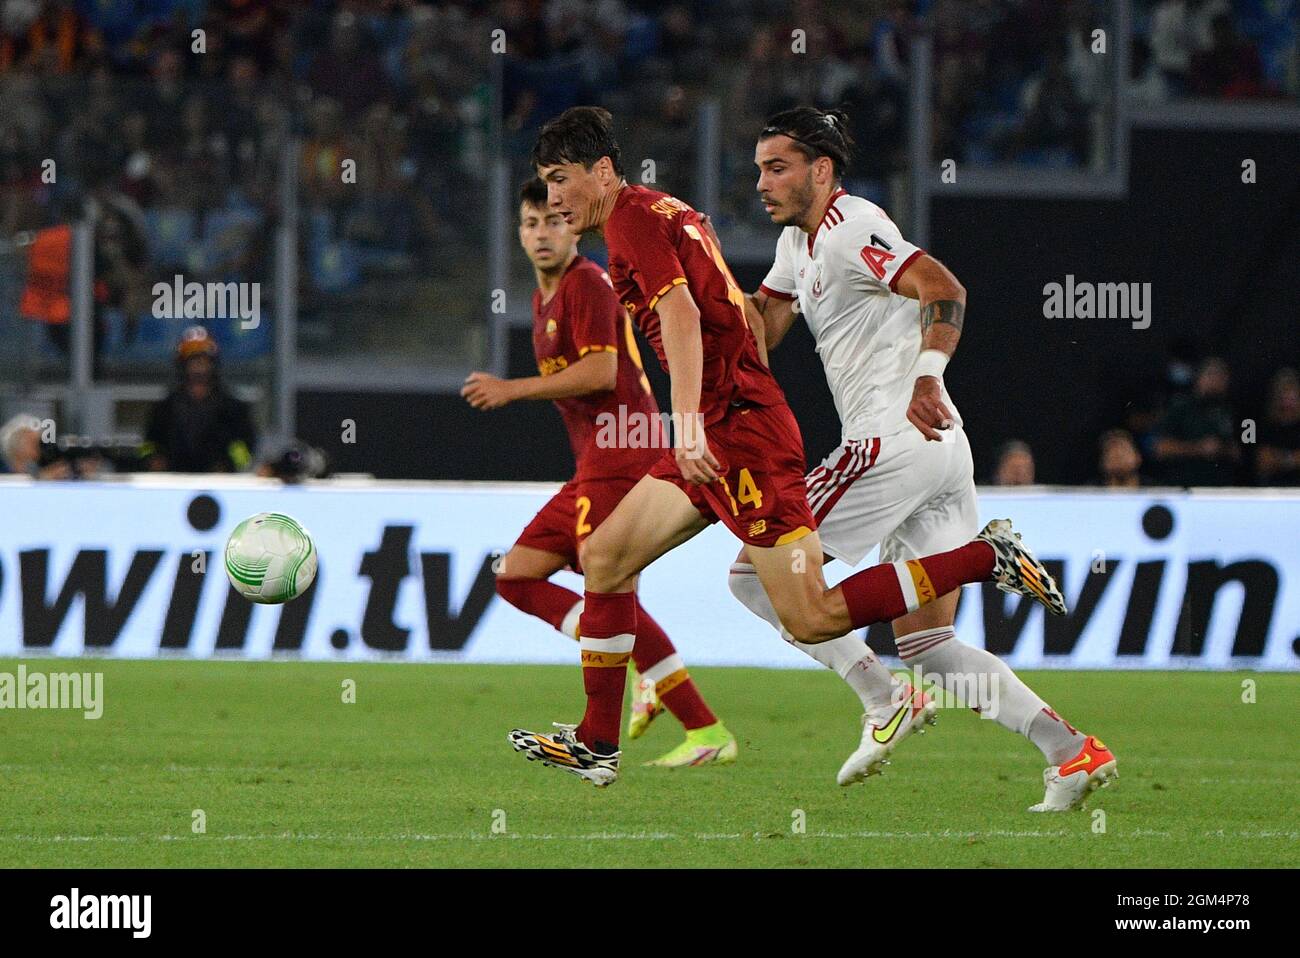 Eldor Shomurodov of AS Roma during the UEFA Europa Conference League football match between AS Roma and CSKA Sofia at The Olympic Stadium in Rome on September 16, 2021. (Photo by FABRIZIO CORRADETTI / LM) Stock Photo